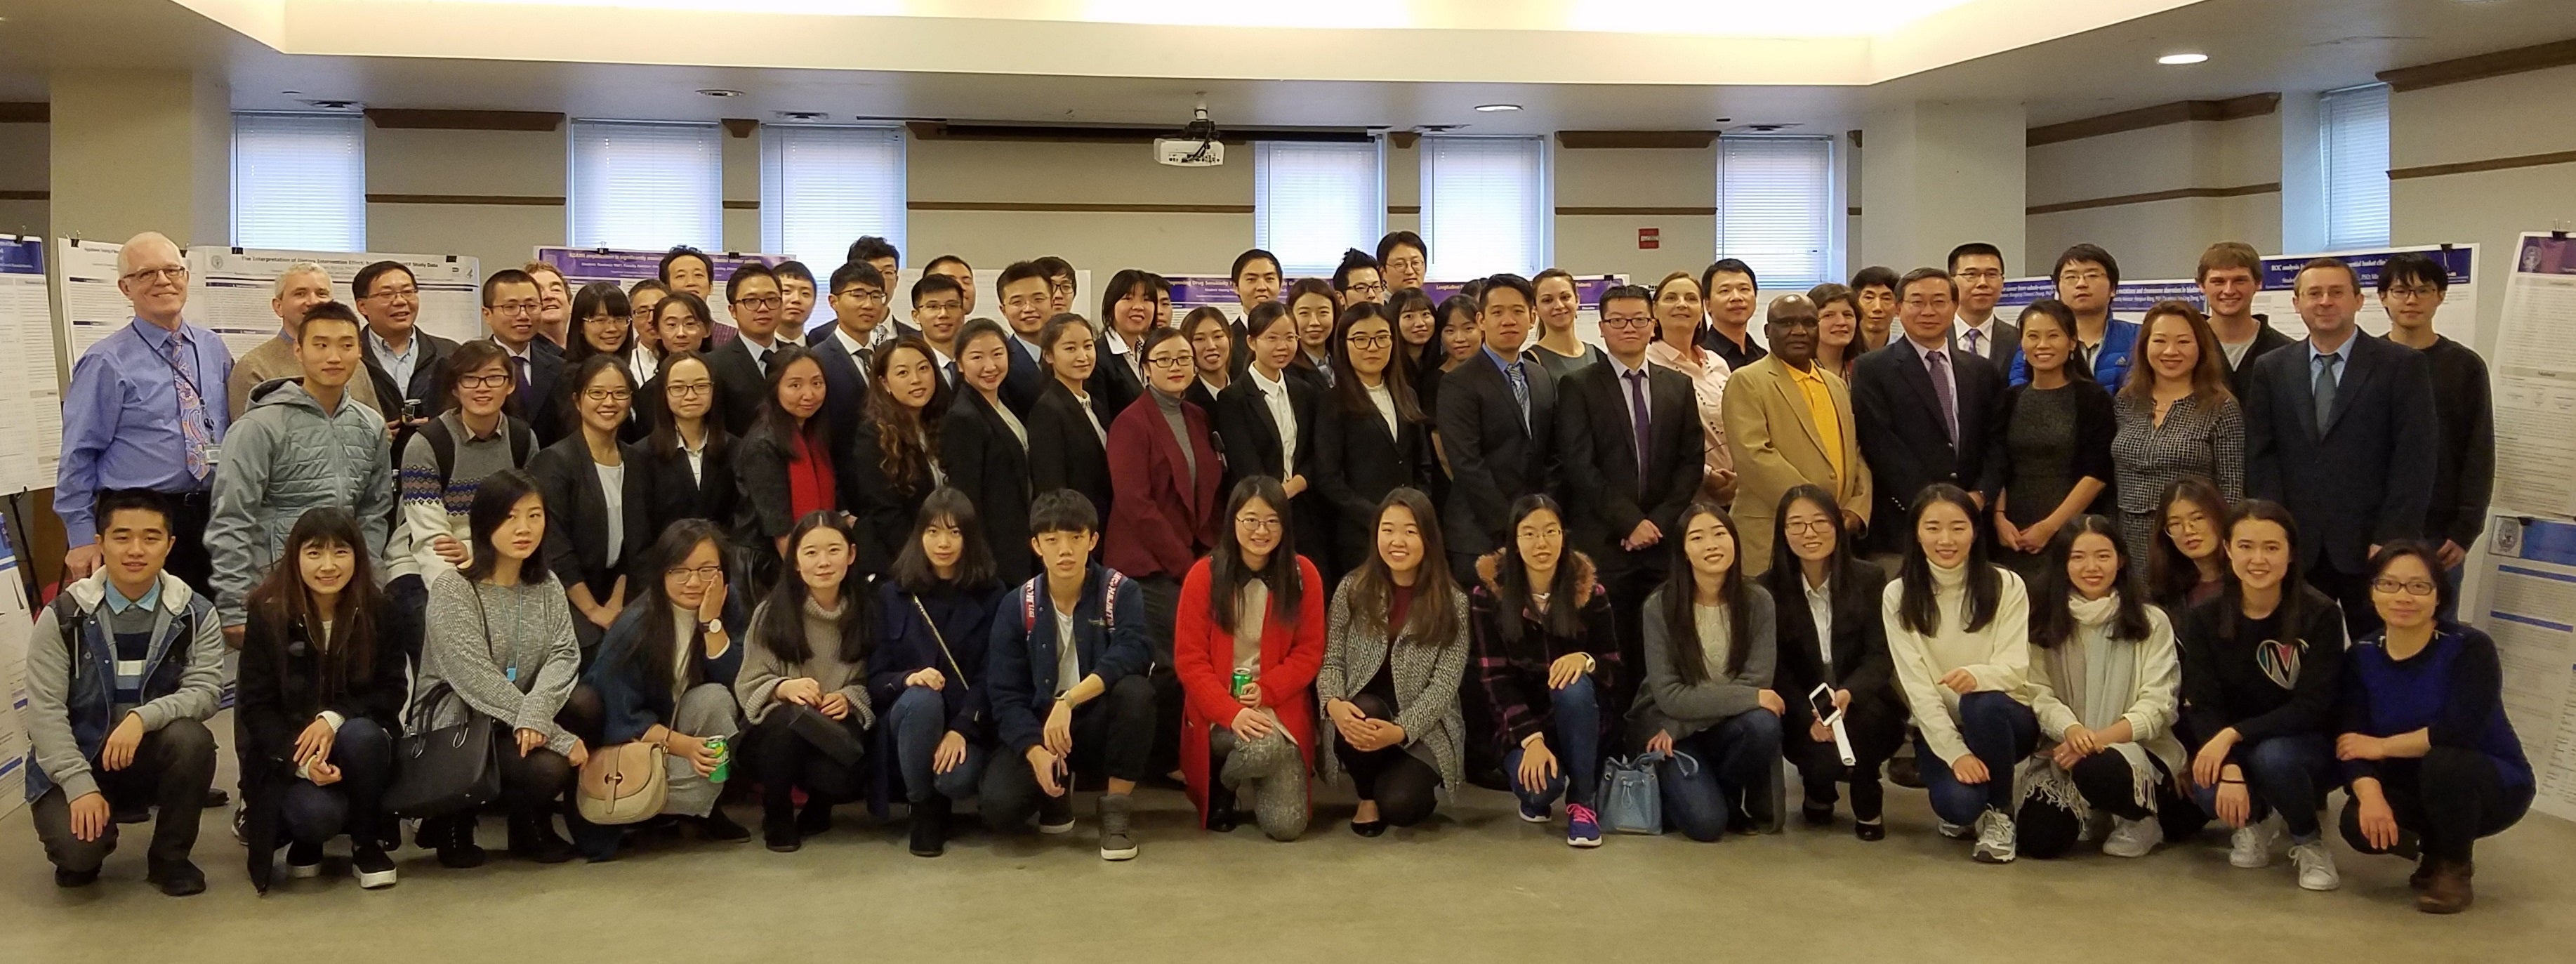 MS students and Ph.D. students pose with Faculty and Staff at the 2016 Annual Research Practicum Defense.